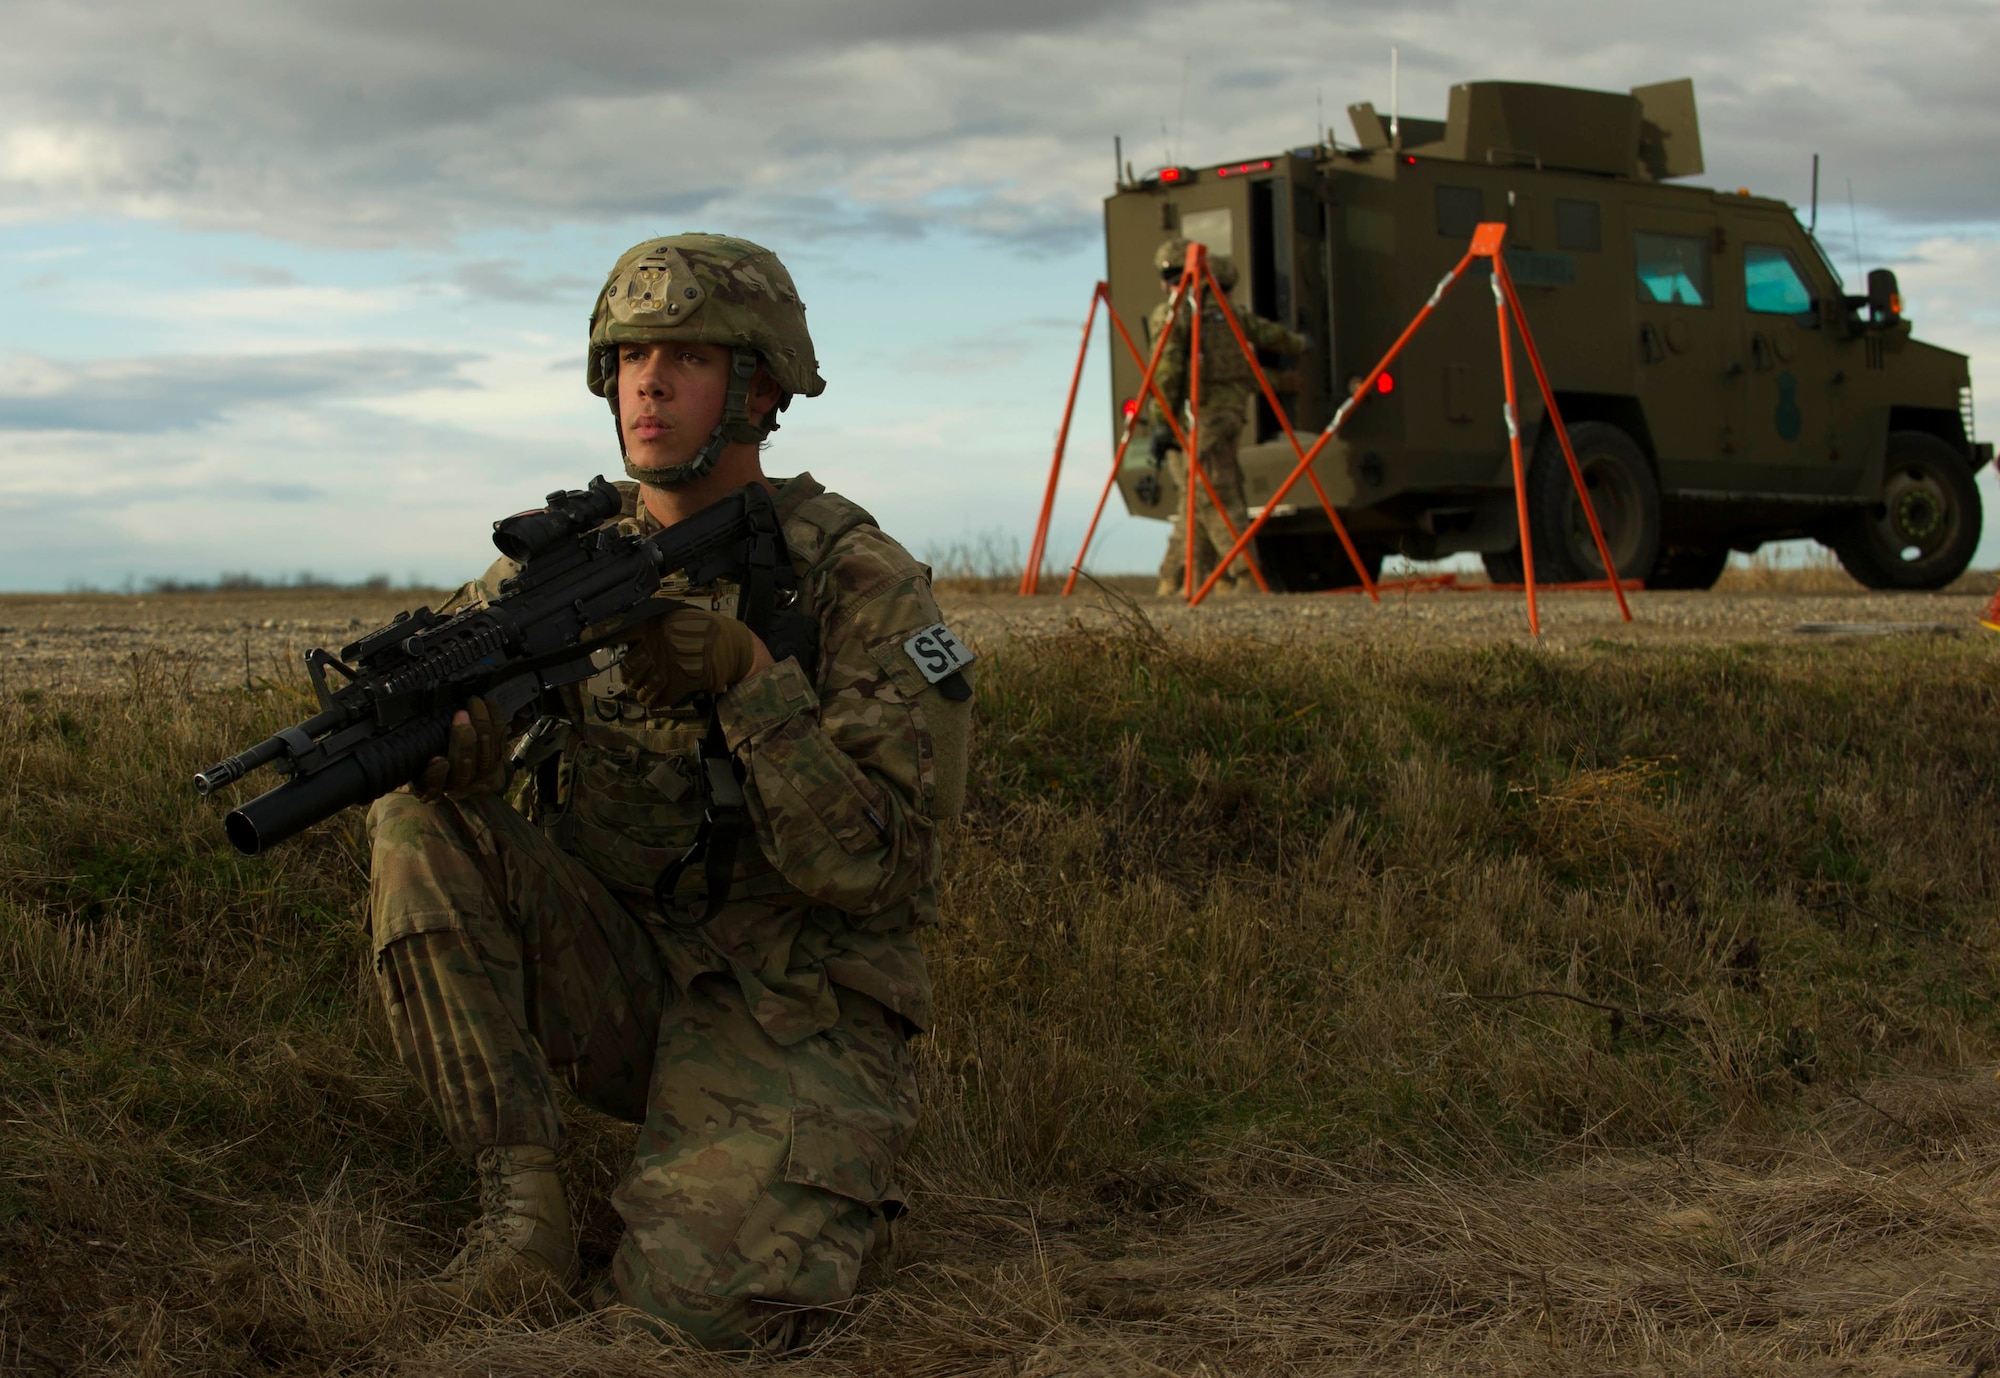 Senior Airman Brandon Thompson, 791st Missile Security Forces Squadron defender, provides security during a recapture and recovery exercise at the missile complex, N.D., Nov. 16, 2016. During the simulated scenario, Thompson and other defenders secured an area, while others recovered the asset, which was taken over by hostile forces. (U.S. Air Force photo/Senior Airman Apryl Hall)